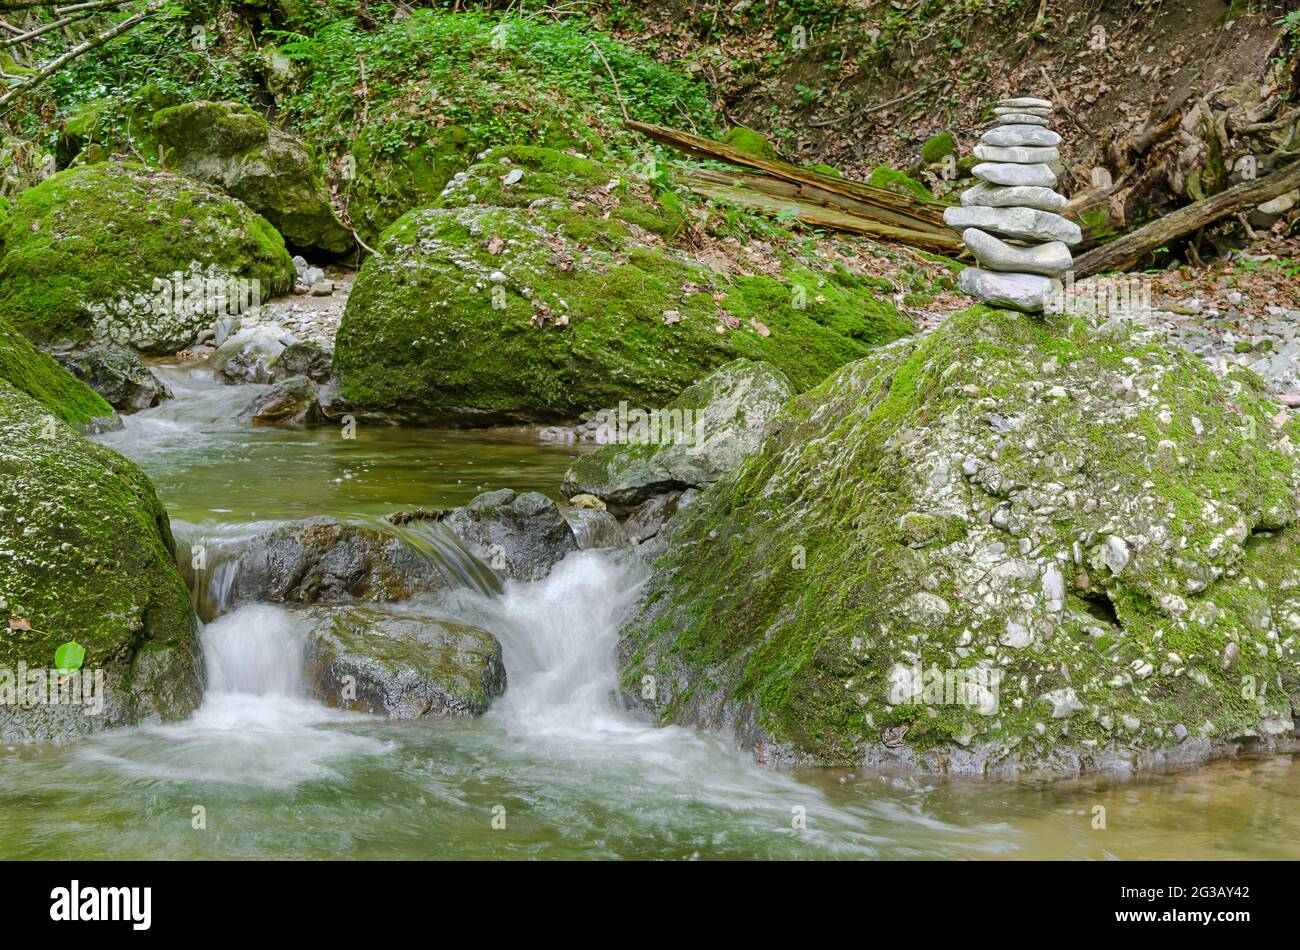 Rock stack, next to a wild stream. Pile of stacked rocks, balancing on a big rock in a streambed. Rocks laid flat upon each other to great height. Stock Photo